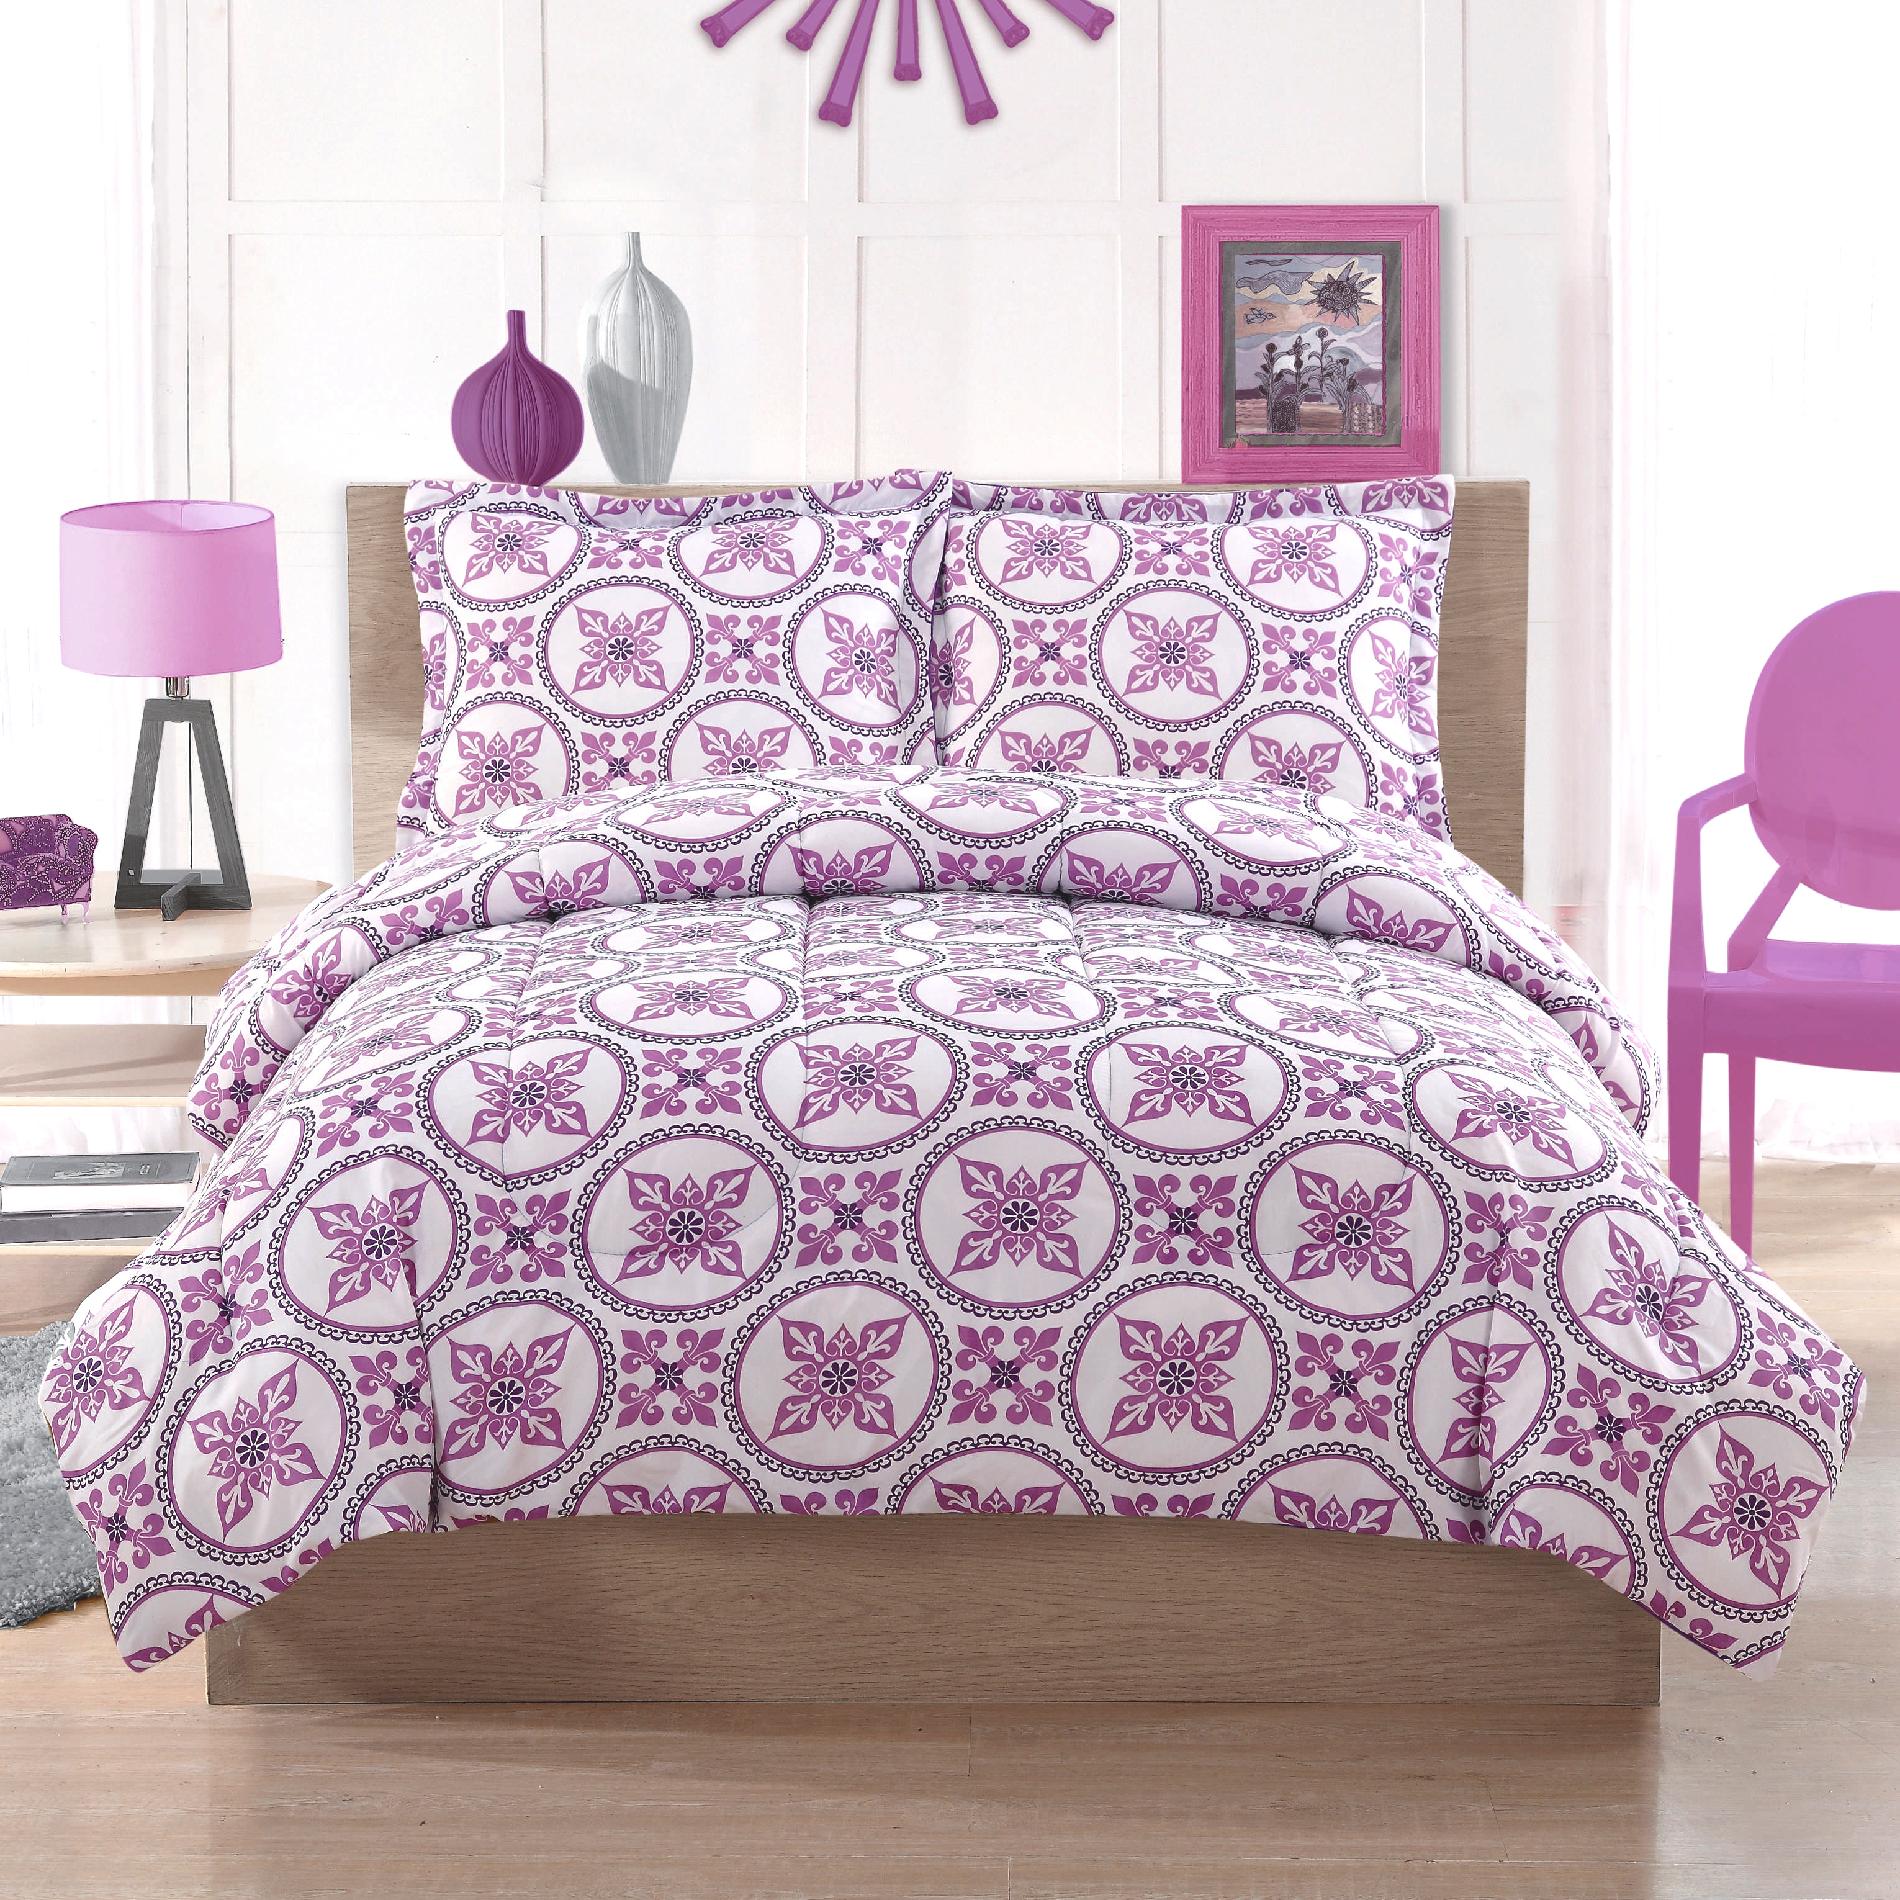 Baroque Circles Twin Comforter with Sham